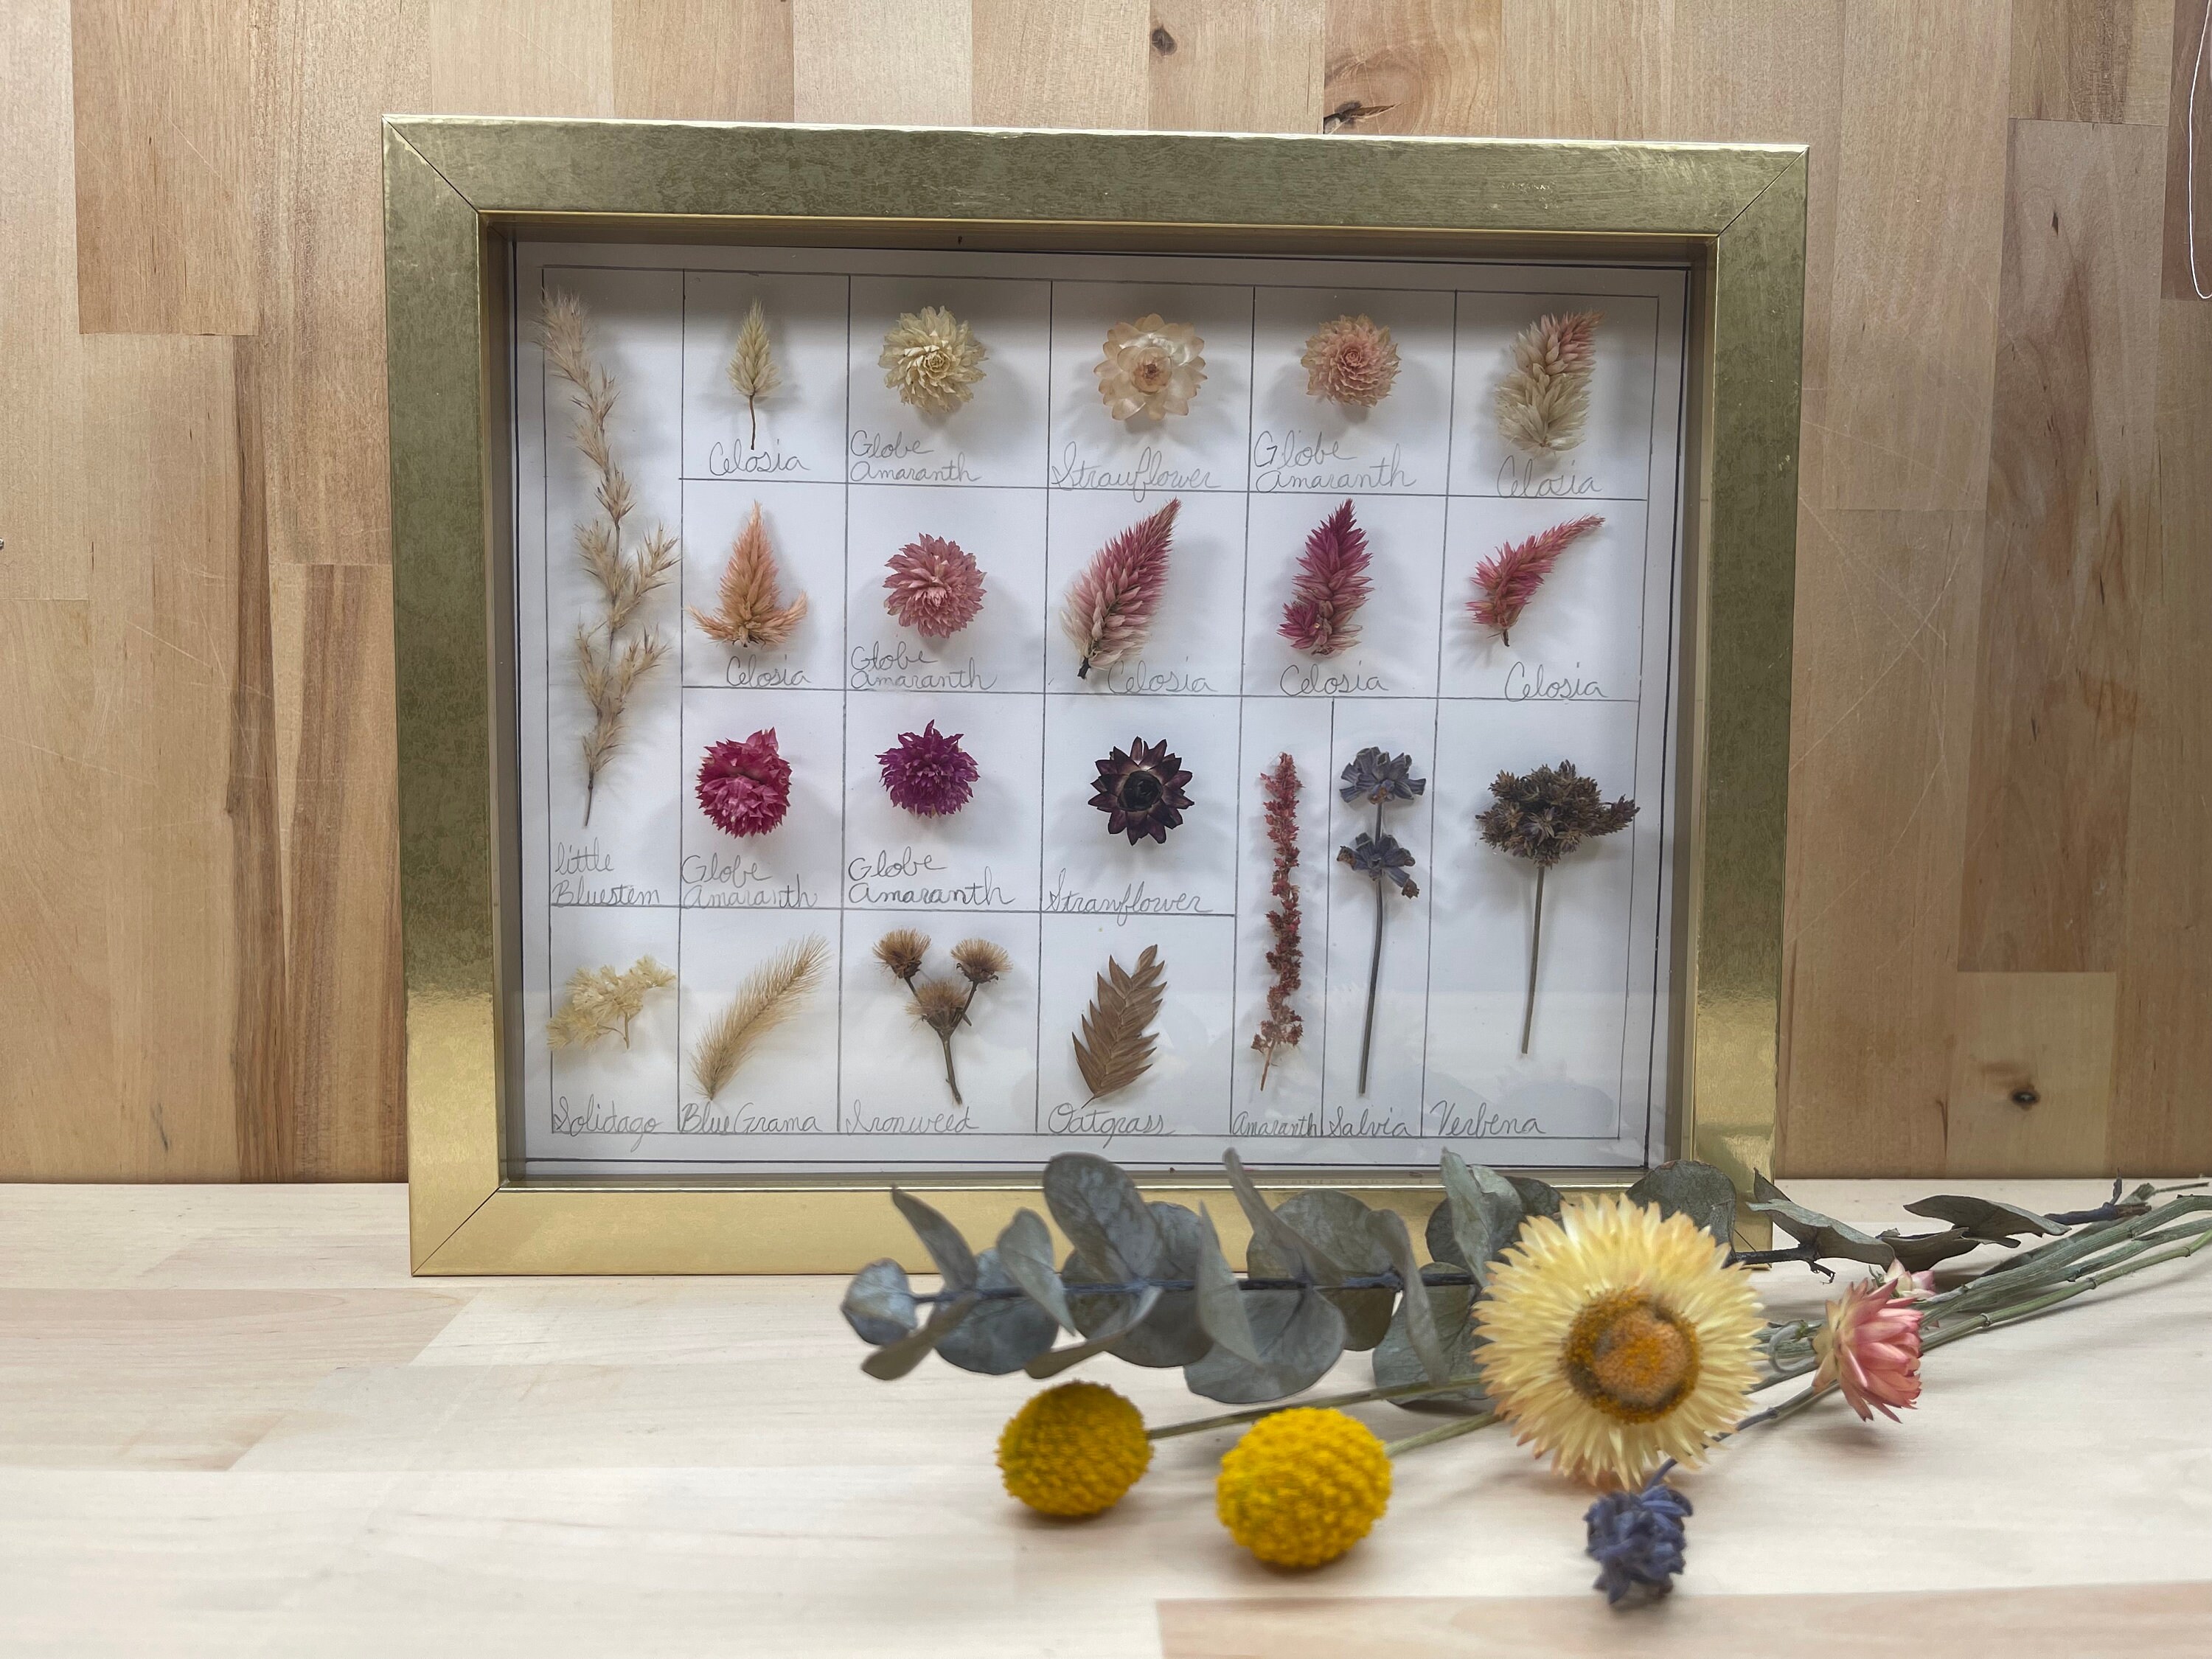 140 Pcs Dried Pressed Flowers for Resin, Real Pressed Flowers Dry Leaves  Bulk Natural Herbs Kit for Scrapbooking DIY Art Crafts, Epoxy Resin Jewelry